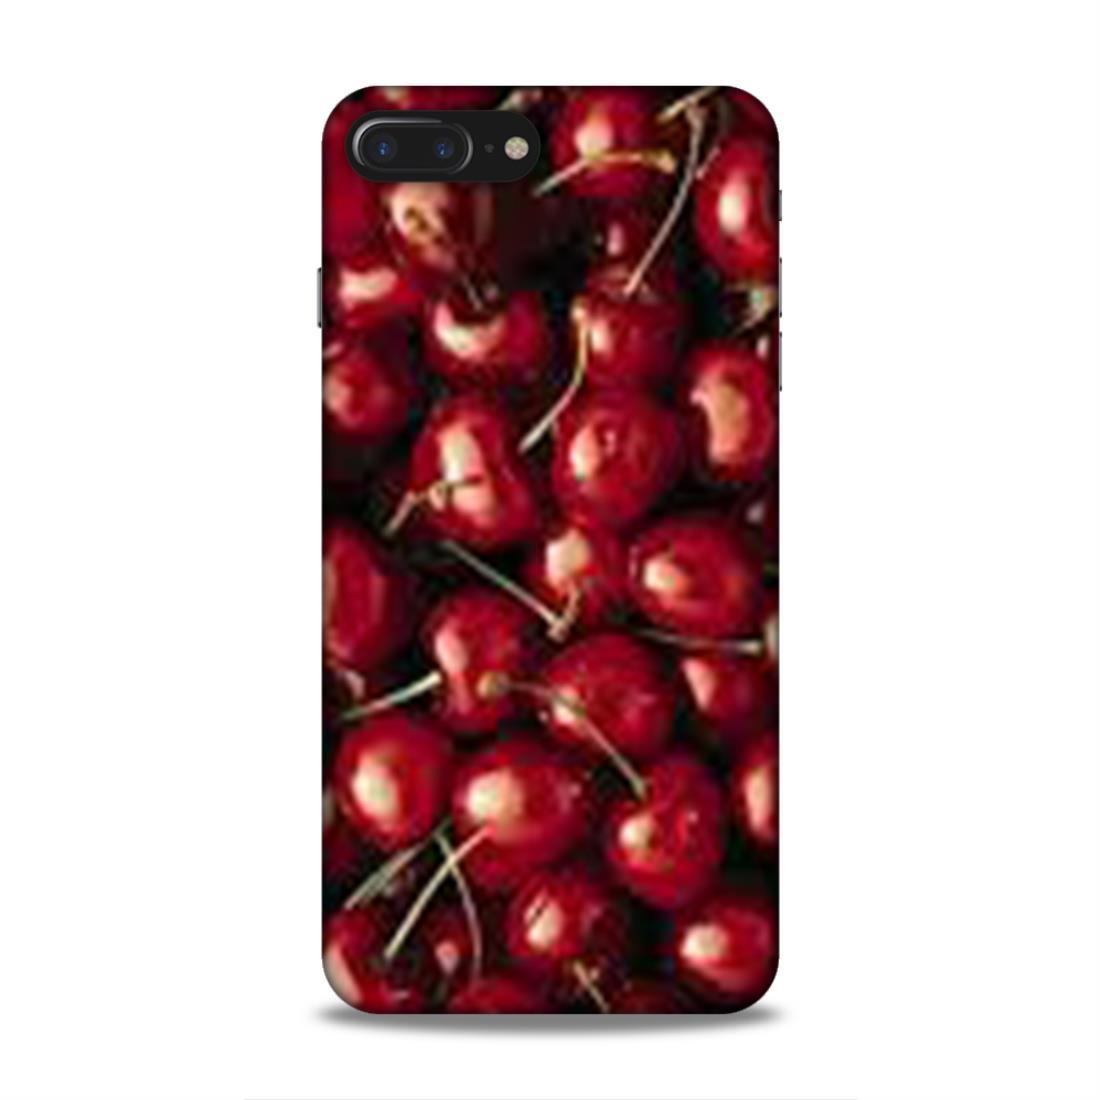 Red Cherry Love iPhone 8 Plus Mobile Cover Case